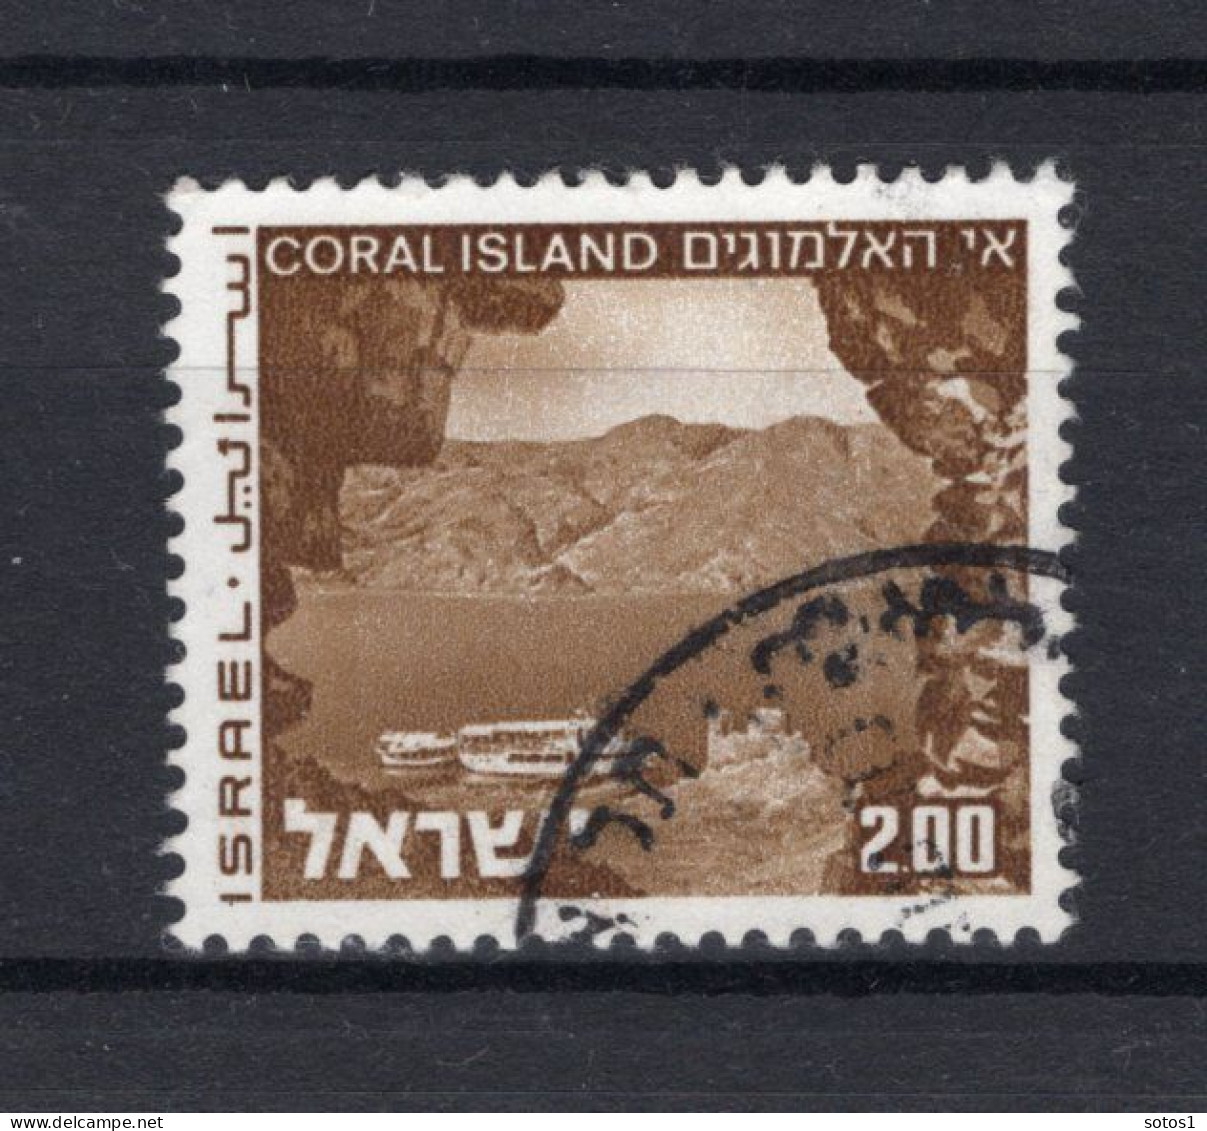 ISRAEL Yt. 470° Gestempeld 1971-1975 - Used Stamps (without Tabs)